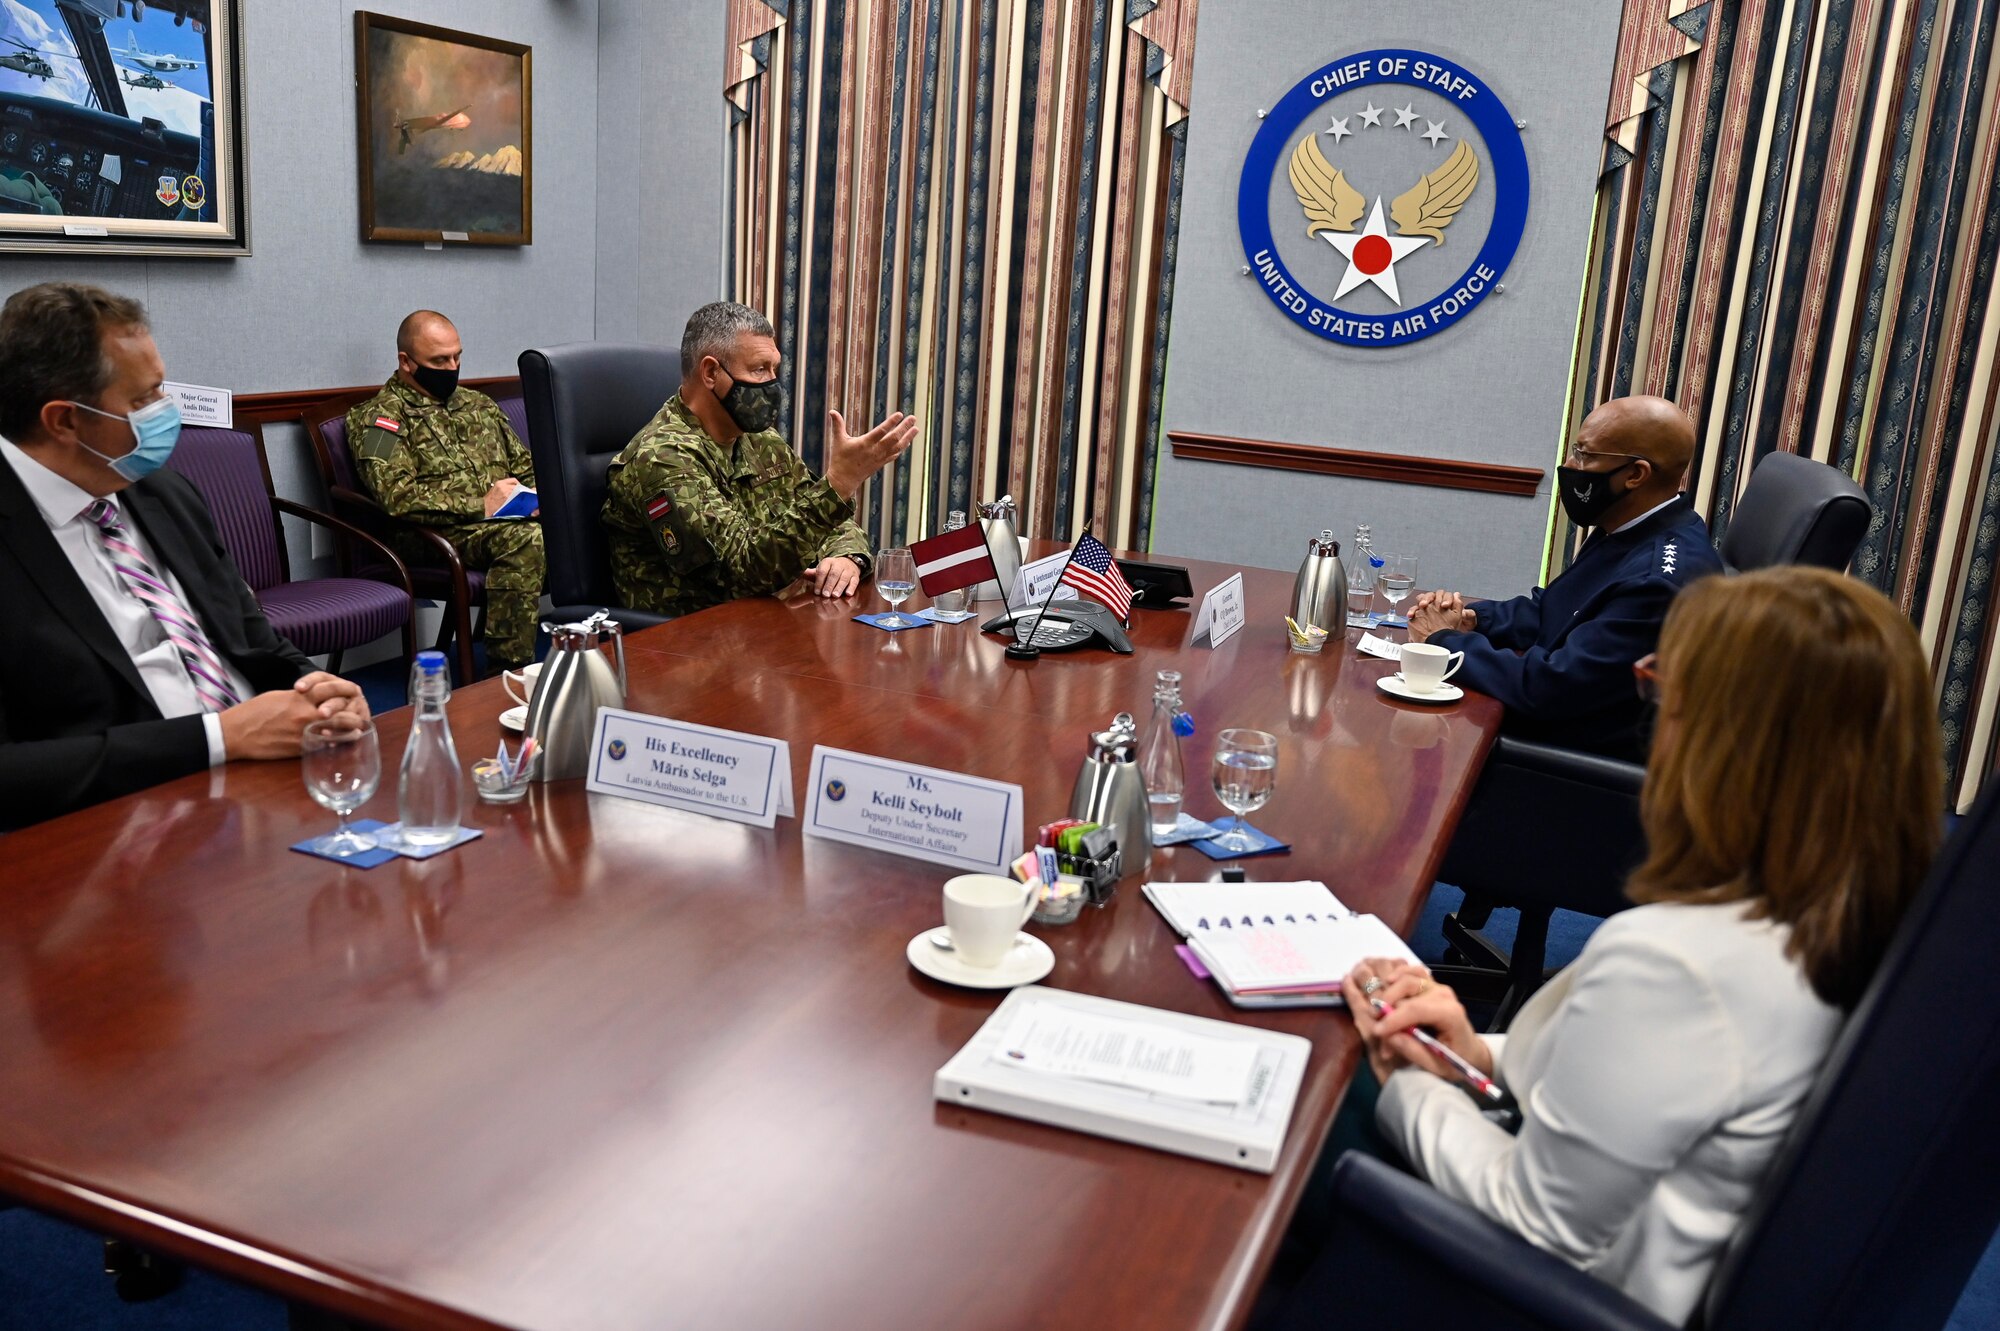 Lt. Gen. Leonids Kalnins, center left, Latvia chief of defense, speaks with Air Force Chief of Staff Gen. CQ Brown, Jr. during a meeting